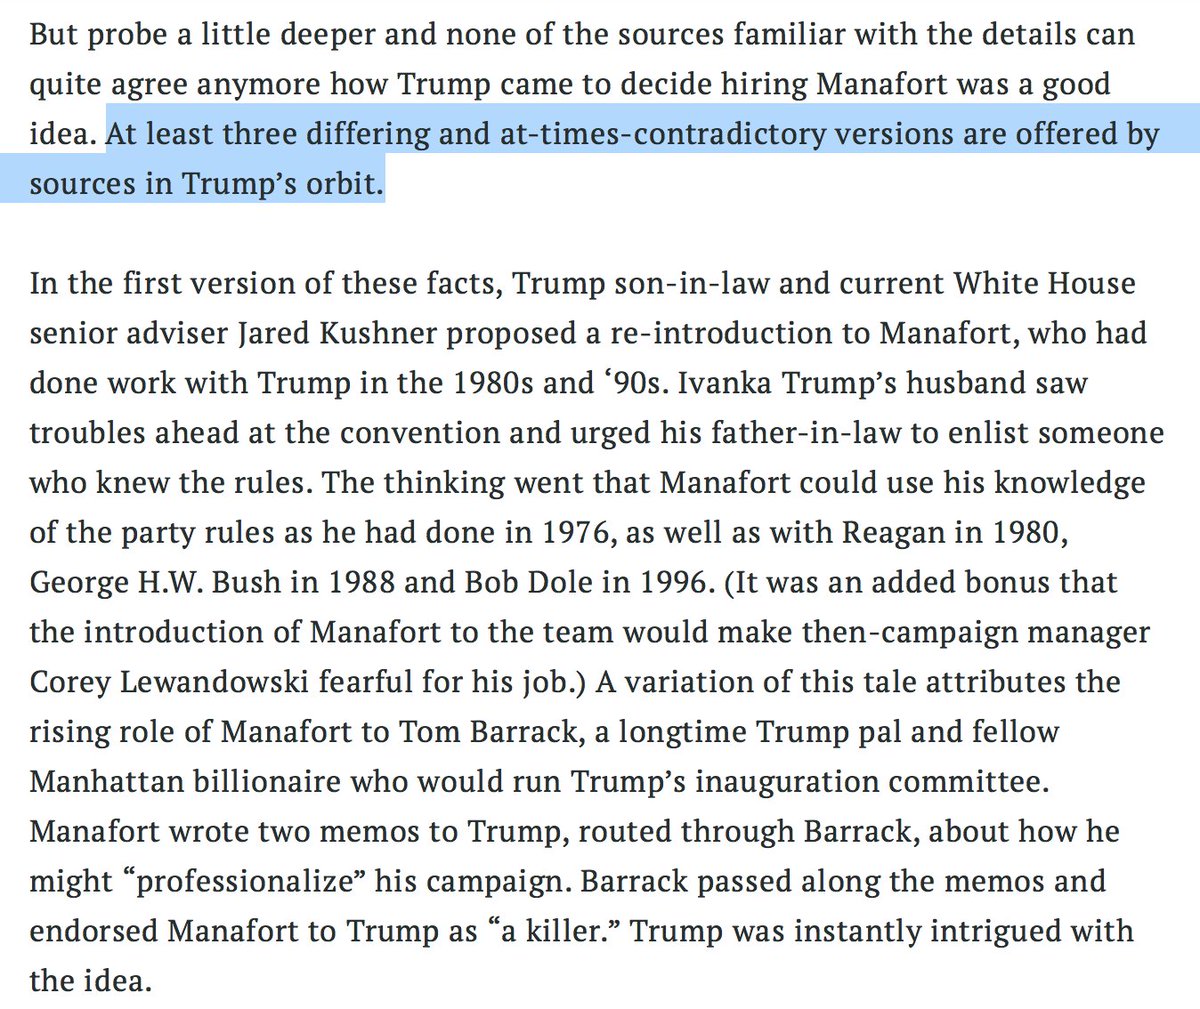 28. First, we gotta knock down some false narratives.A) We could fill every mob port w/ the lies that poor out of dotard. But the lie of how he met/knew Manafort... well, it's there to protect his daddy.And I'm all of f*cks for "Old Man Trump." http://time.com/5003298/paul-manafort-indictment-donald-trump/